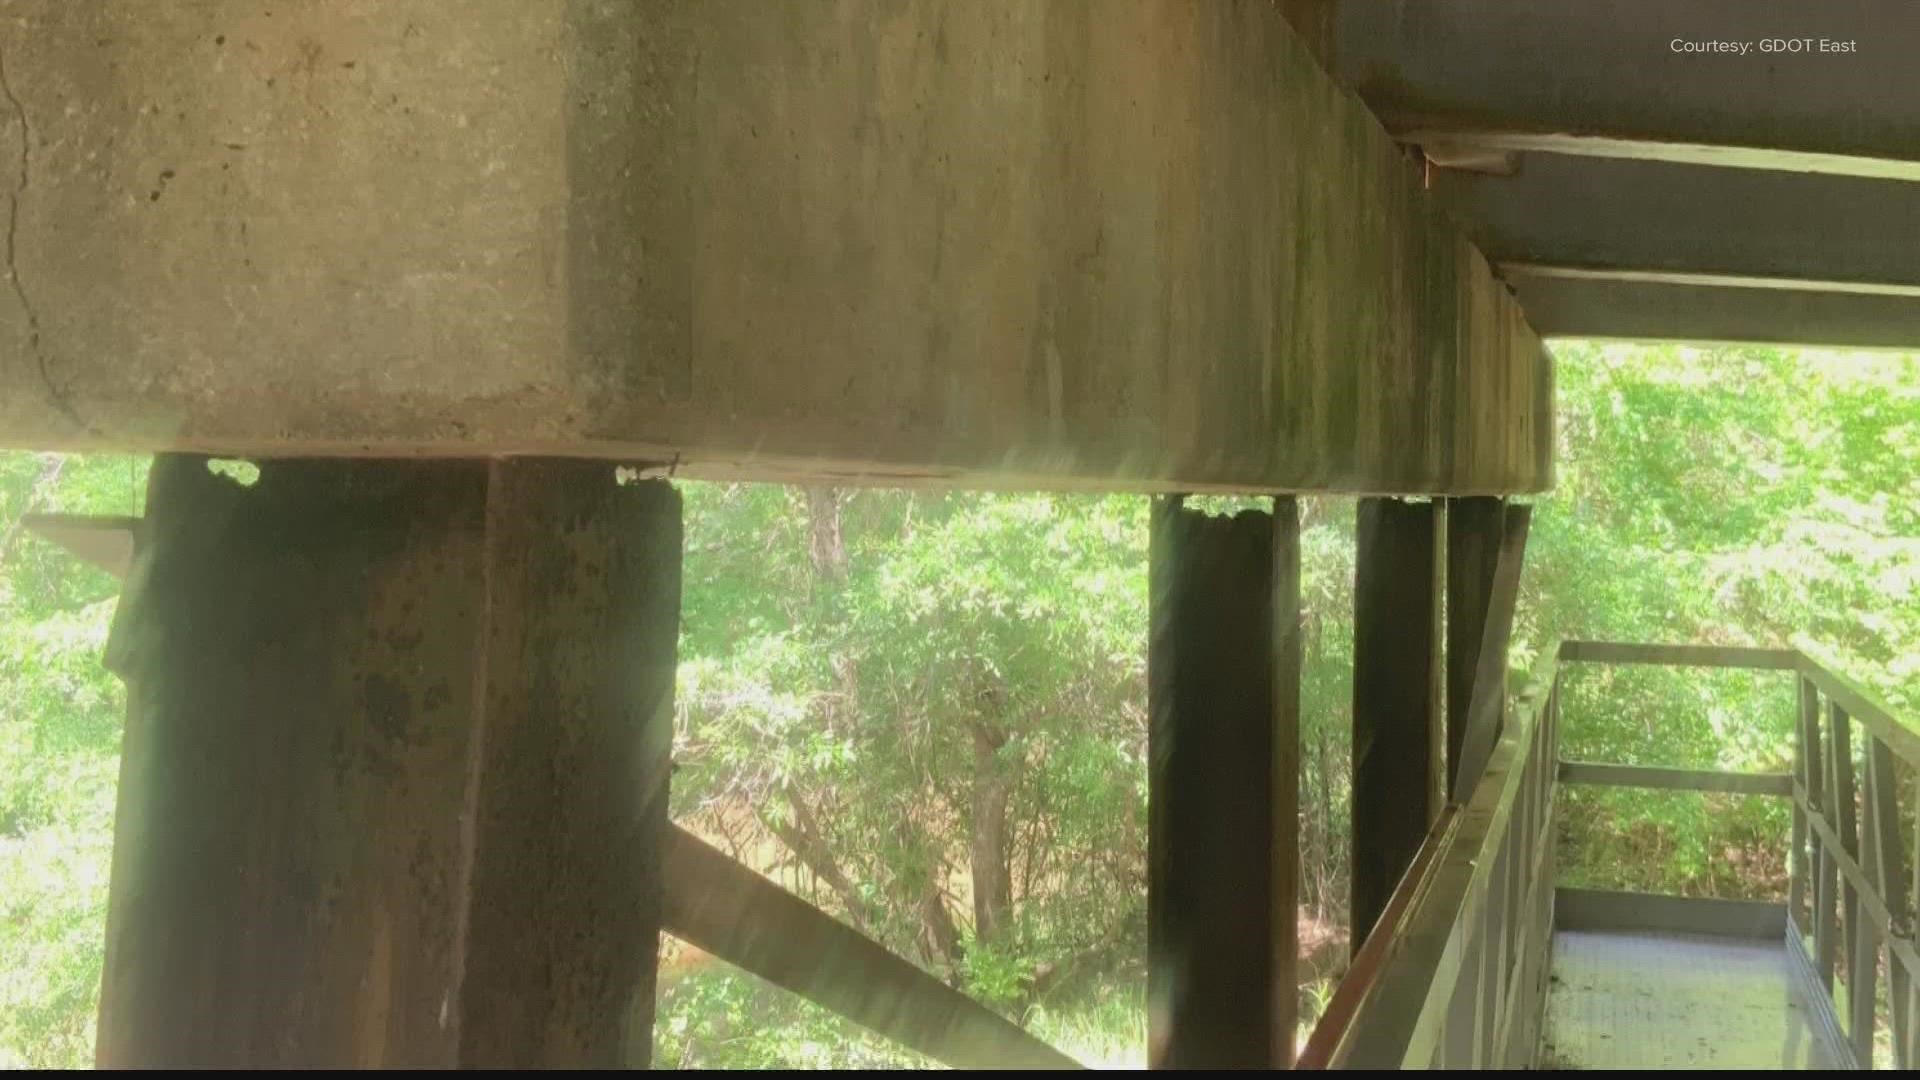 Crews with the Department of Transportation found extensive corrosion on the bridge.